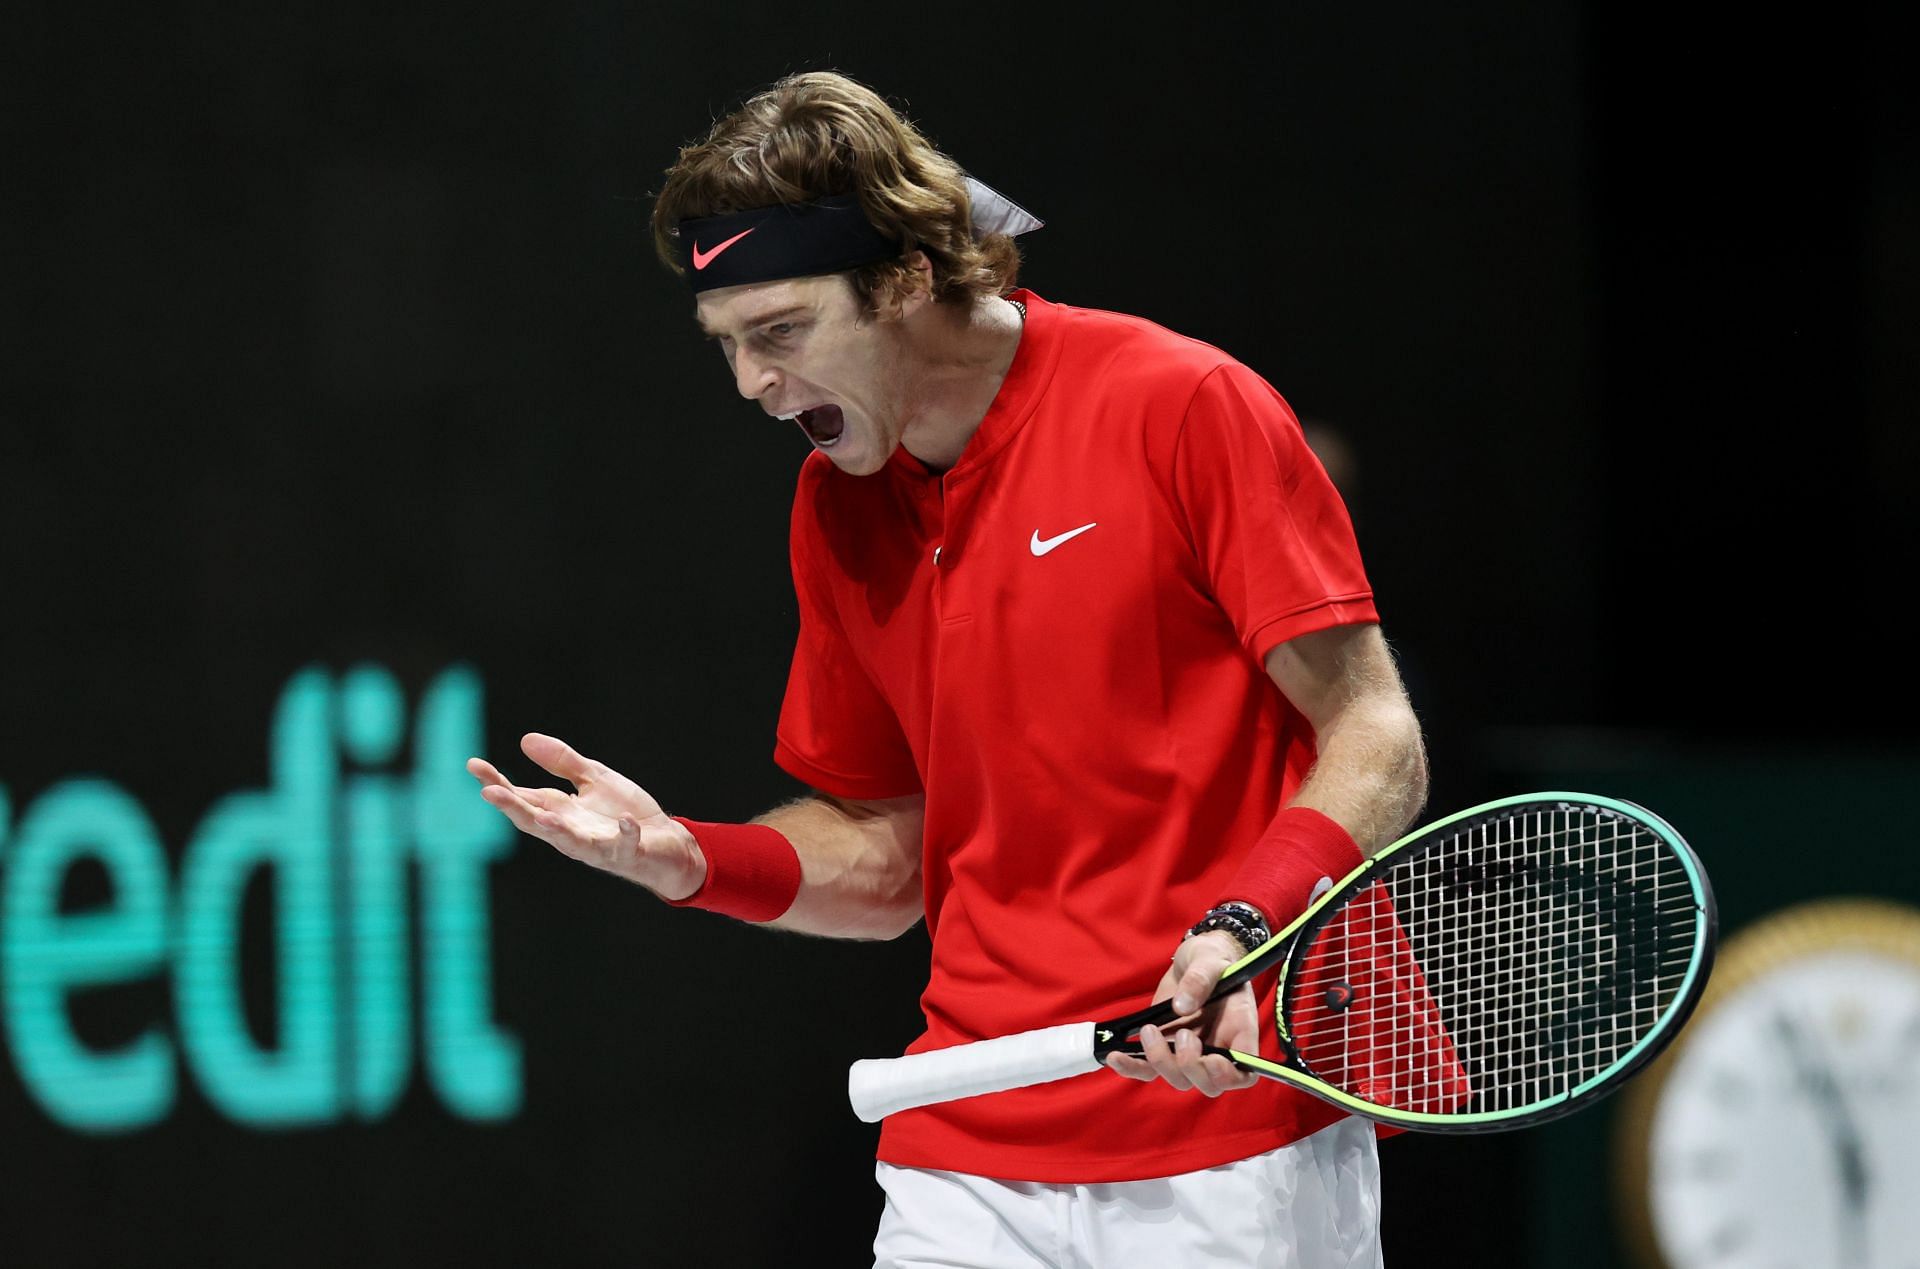 Andrey Rublev in the 2021 Davis Cup final